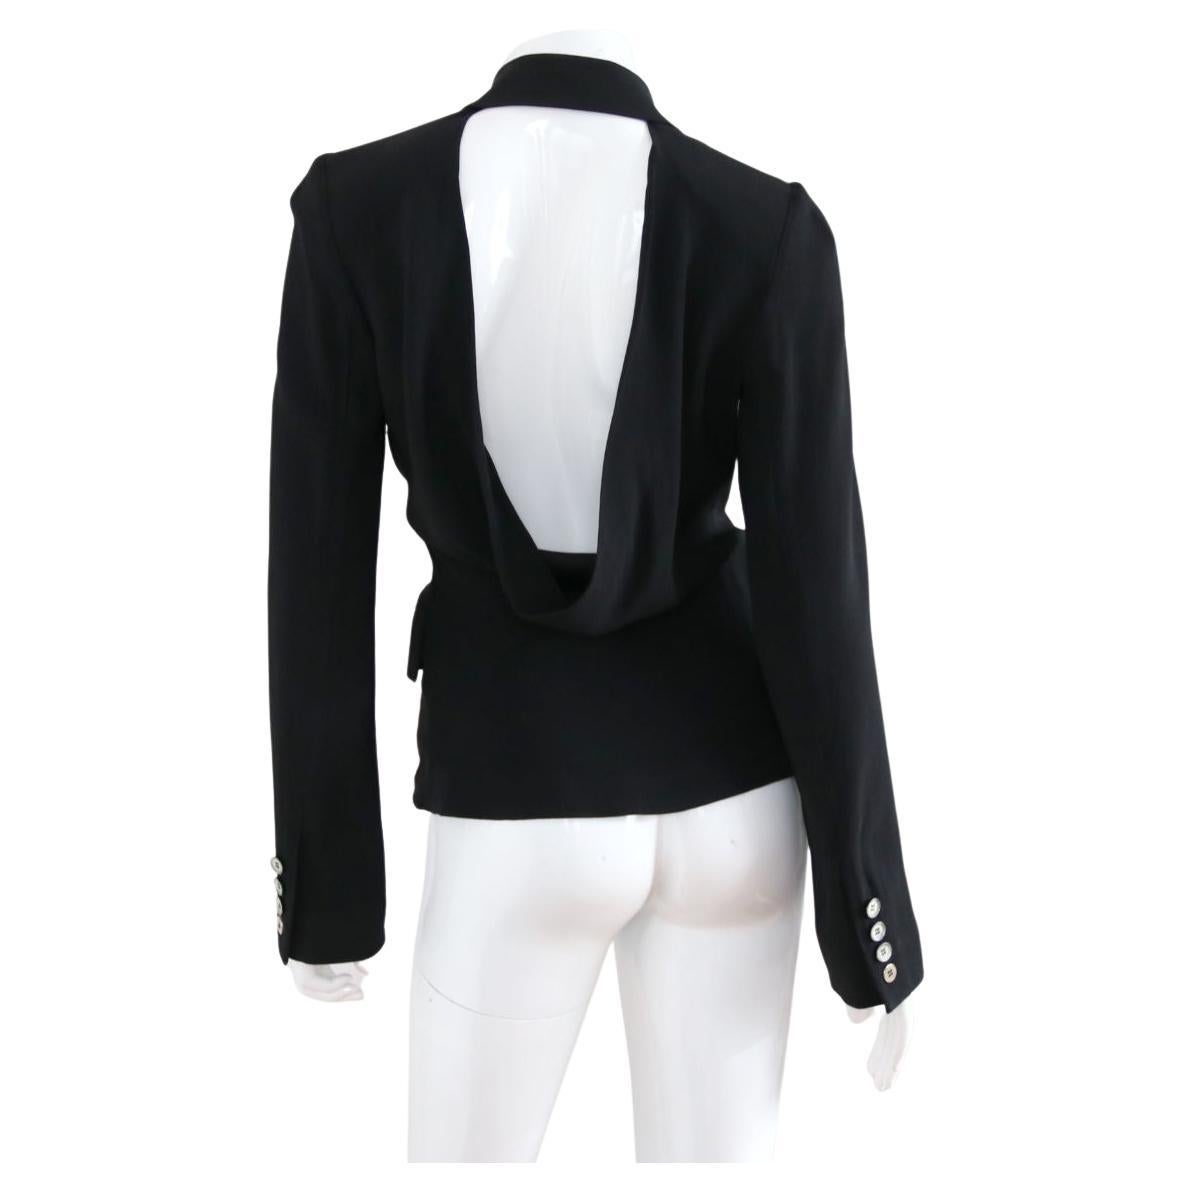 PACO RABANNE 2000s Black Blazer / Jacket With A Large Cut-Out Back 